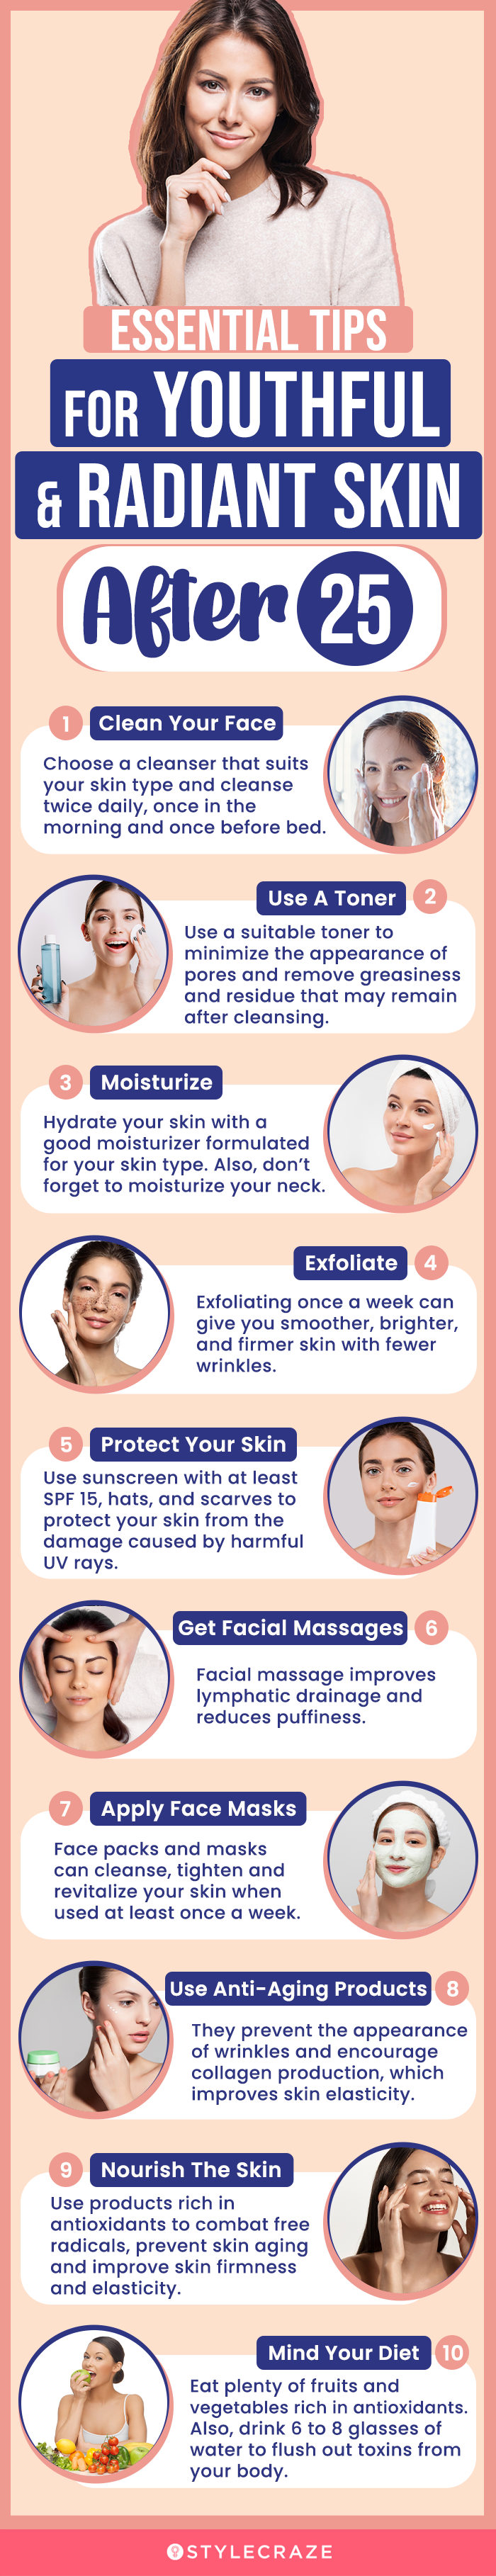 essential tips for youthful and radiant skin after 25 [infographic]